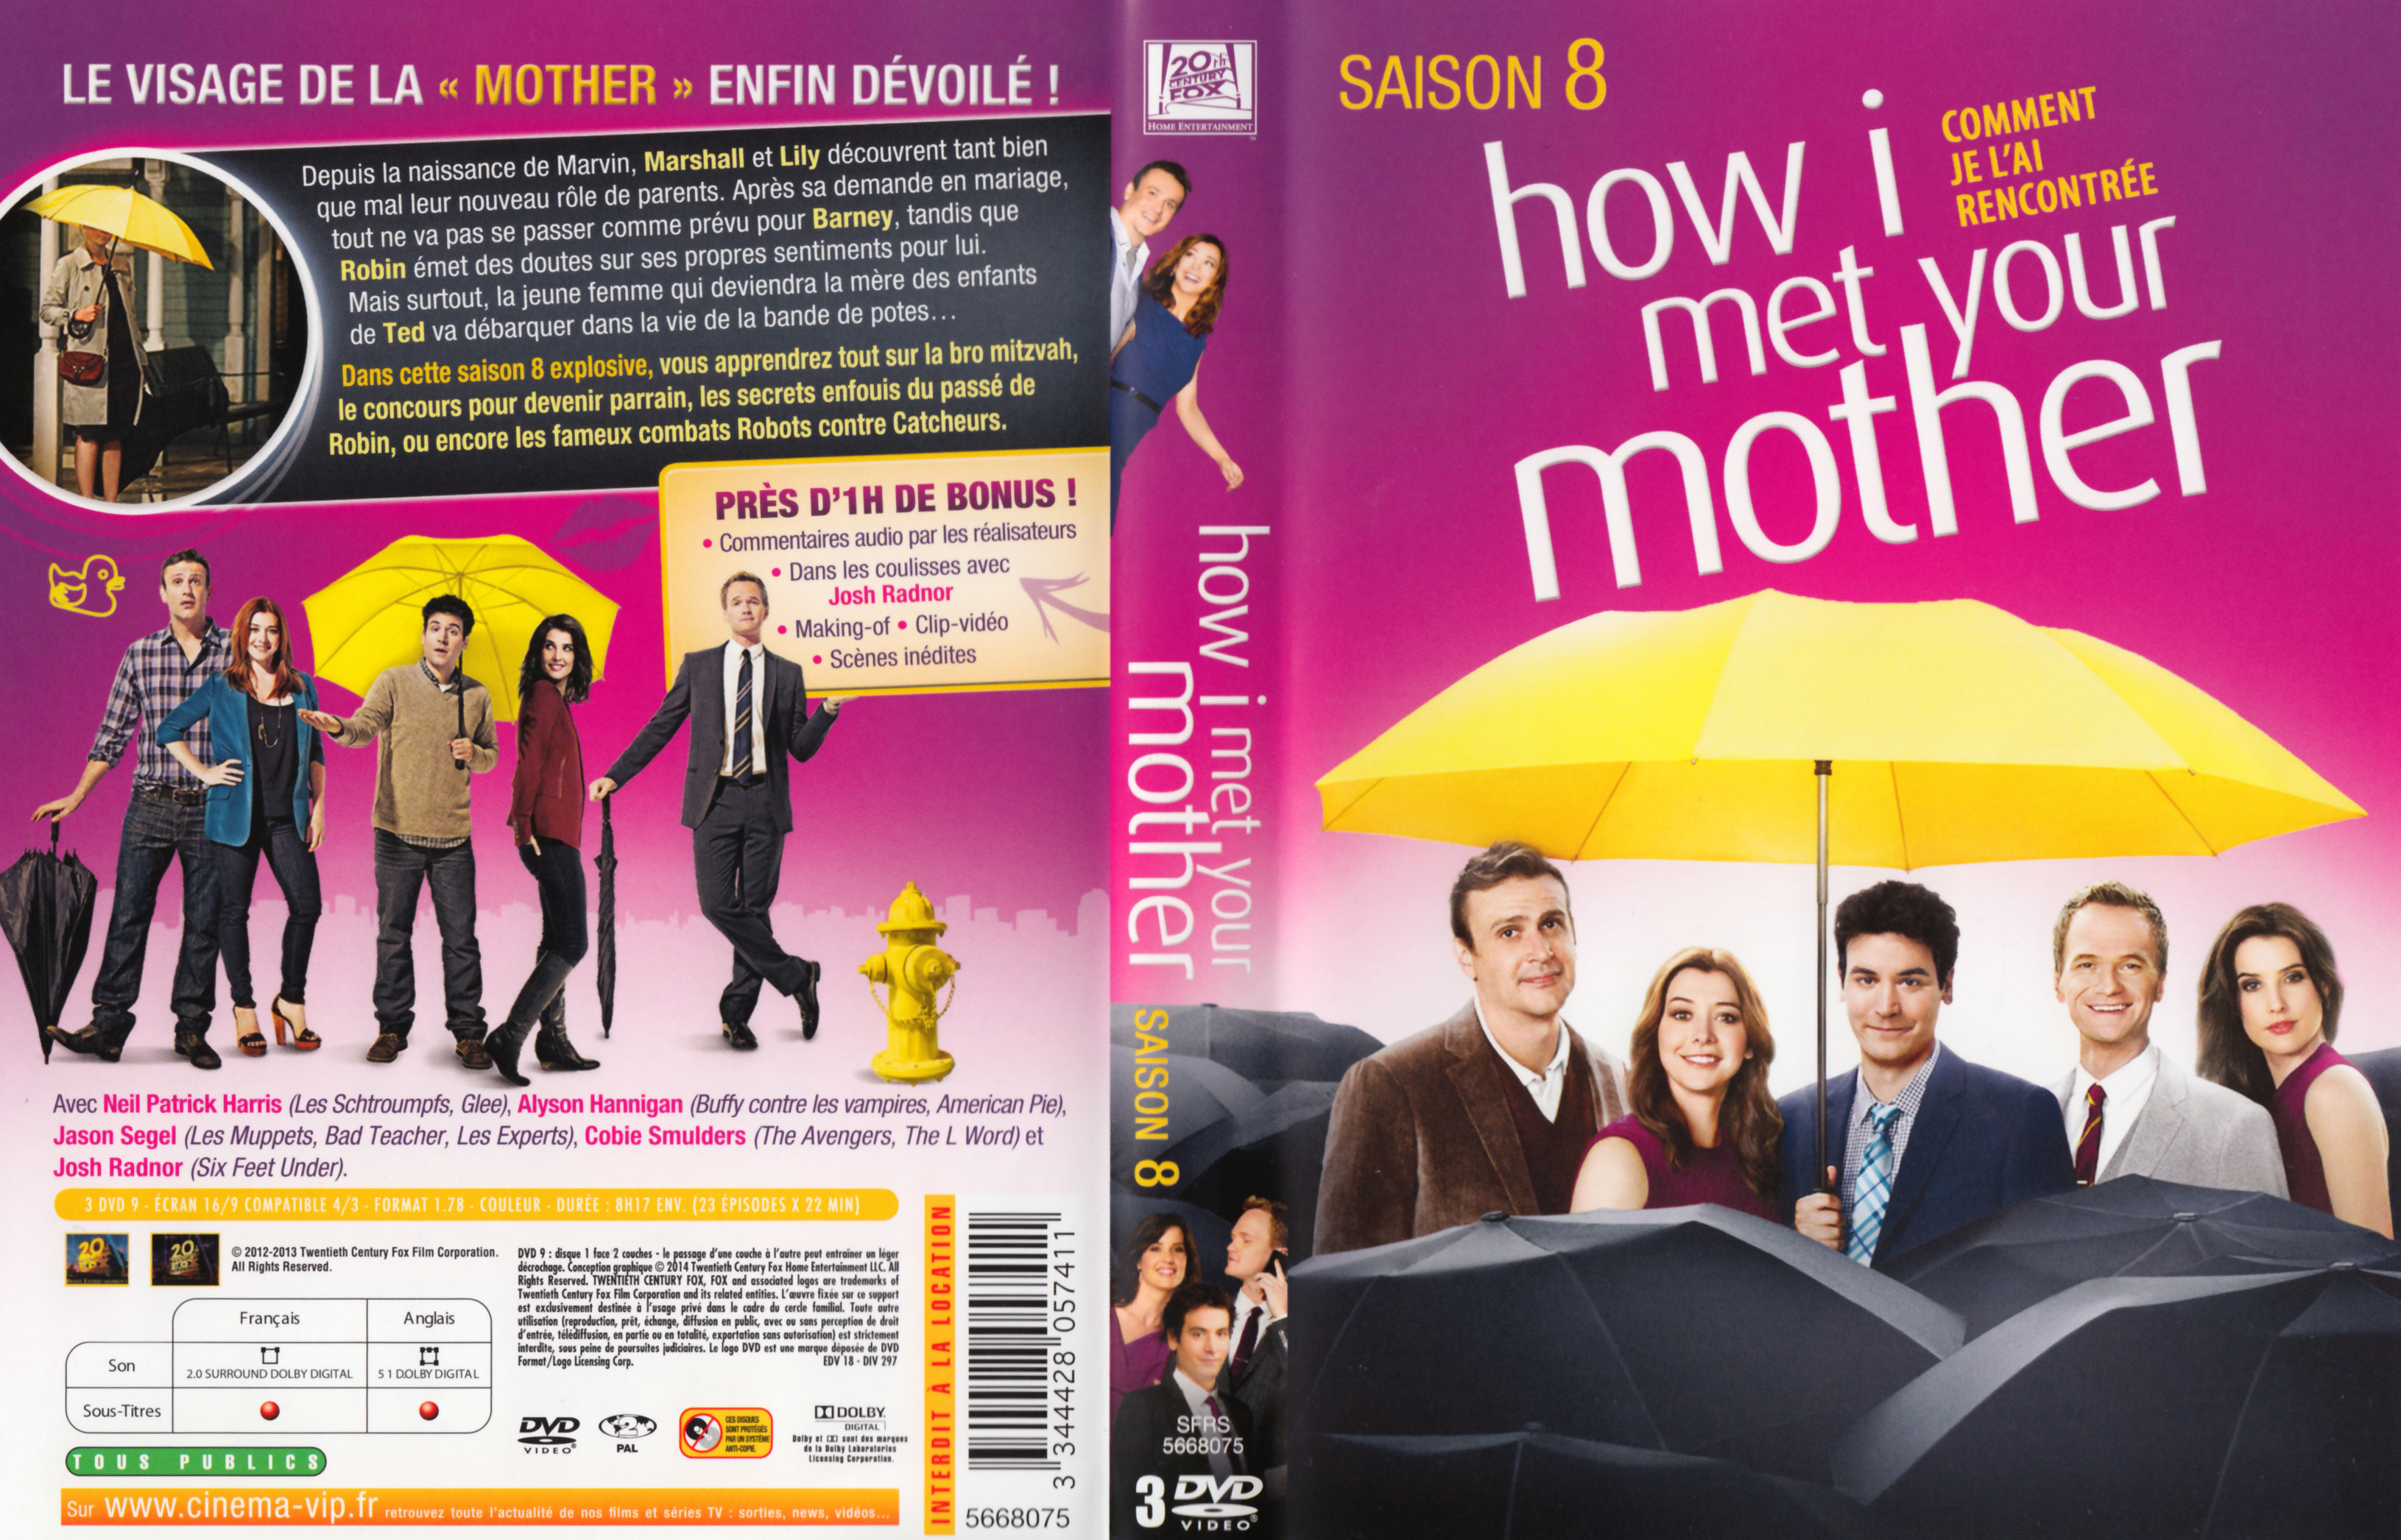 Jaquette DVD How i met your mother Saison 8